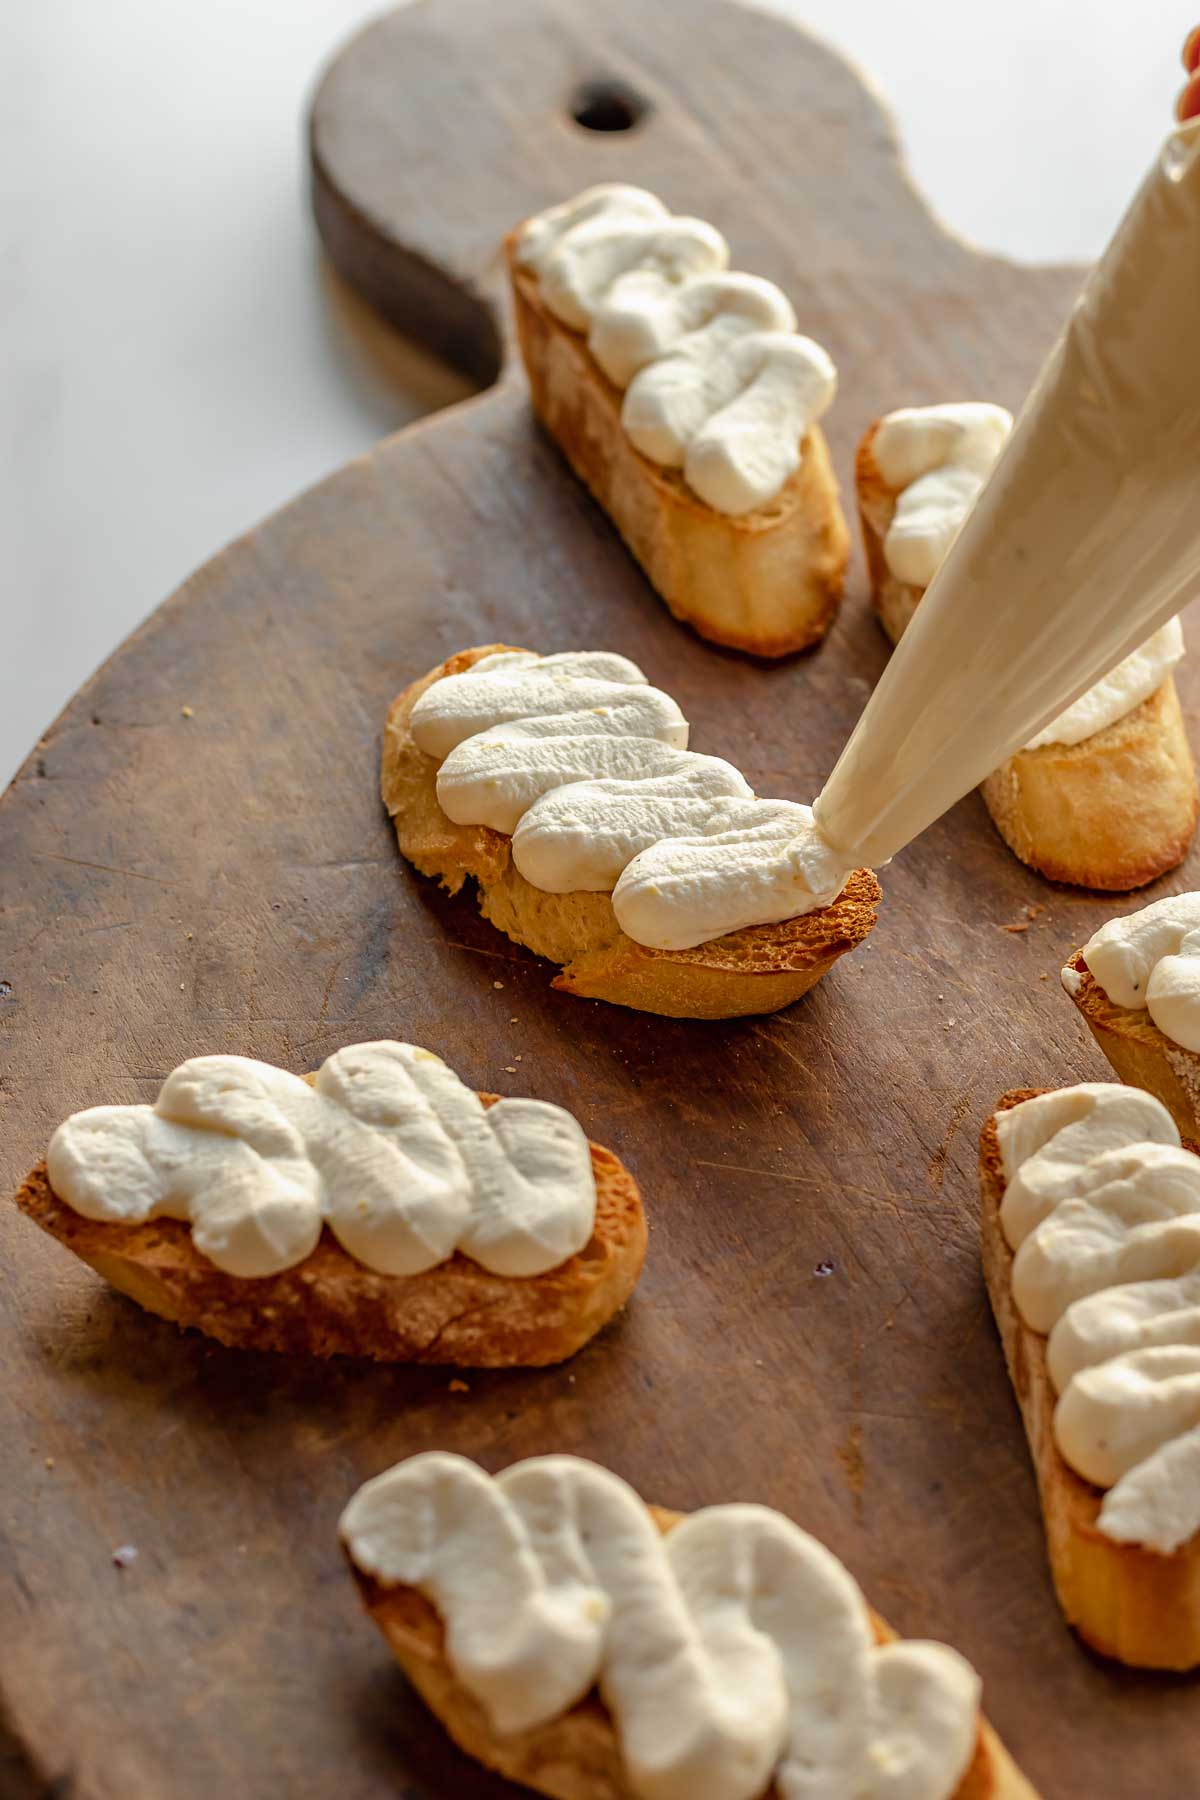 A piping bag pipes squiggles of whipped ricotta onto toasted baguette slices.